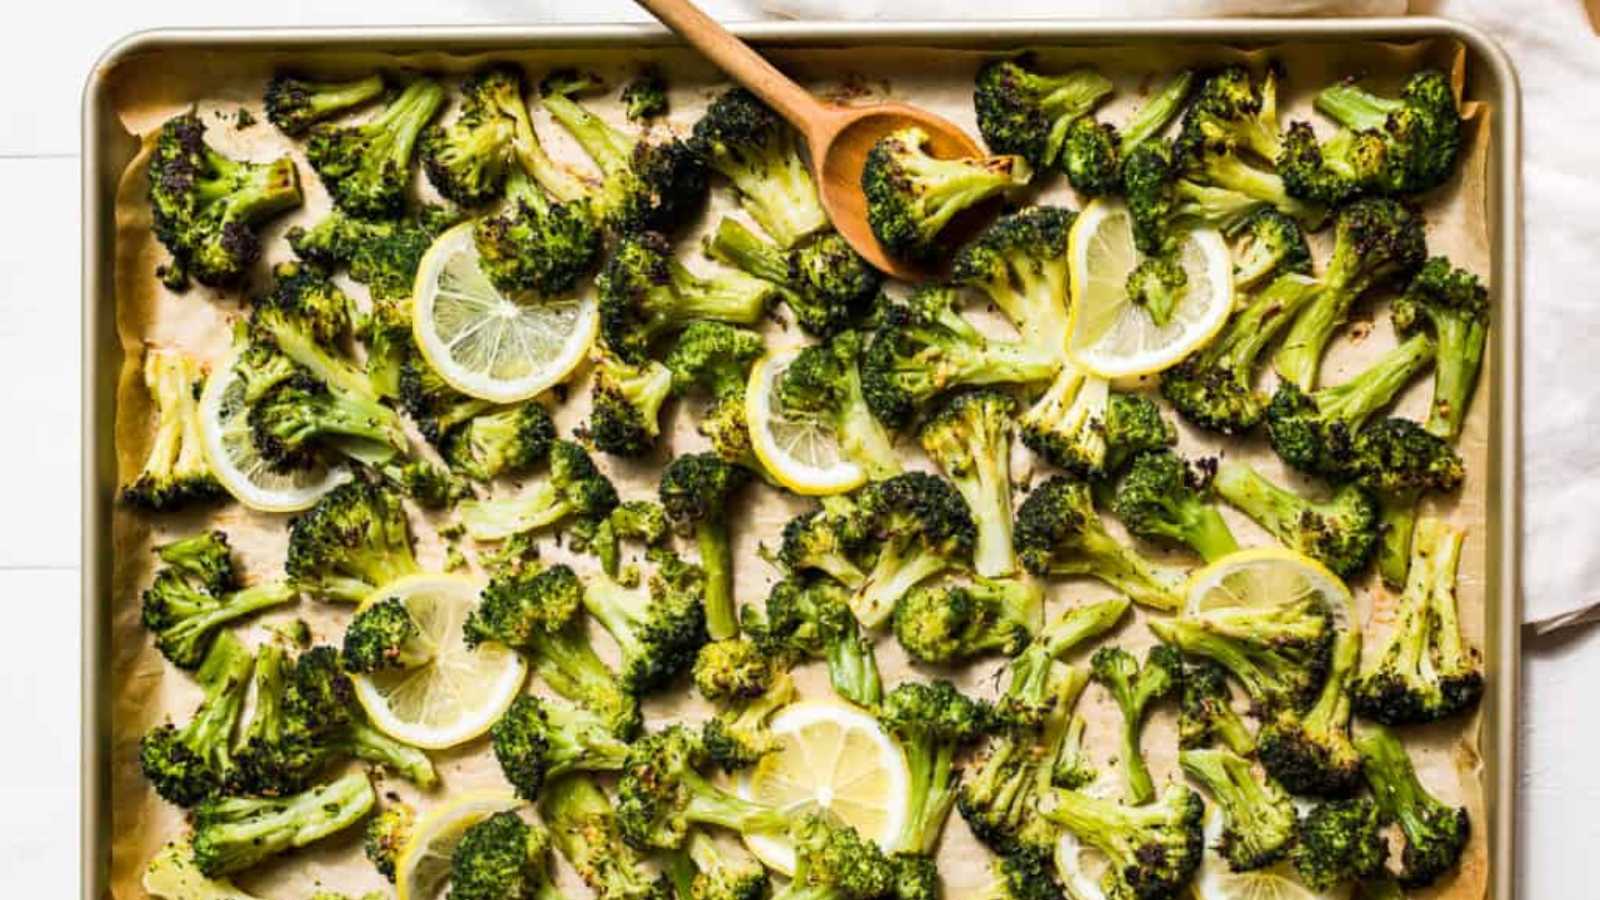 Roasted broccoli with tangy lemon slices in a baking pan.